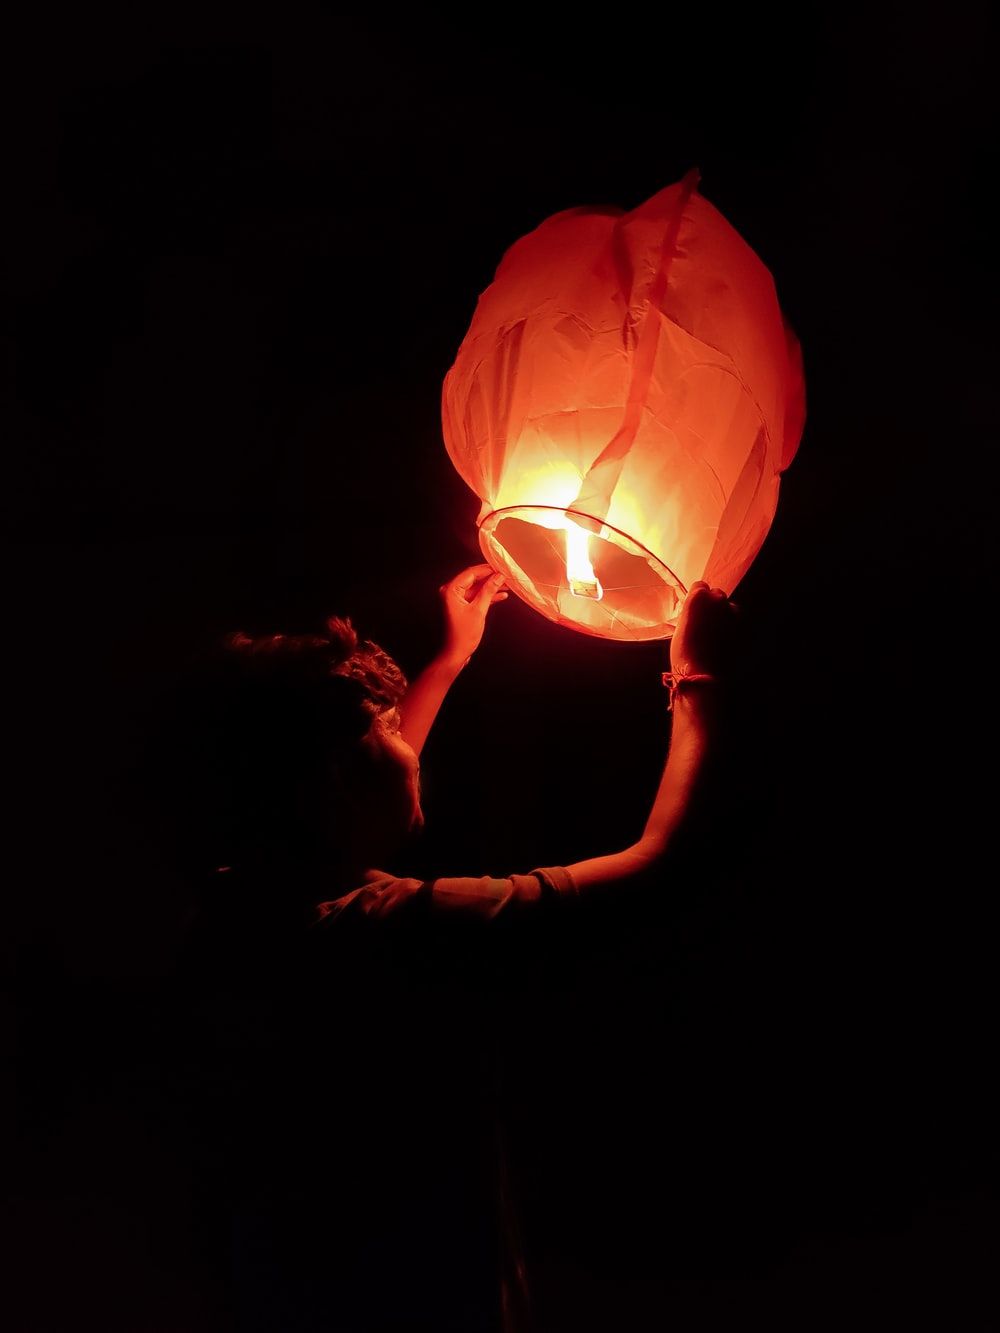 Sky Lantern Picture. Download Free Image